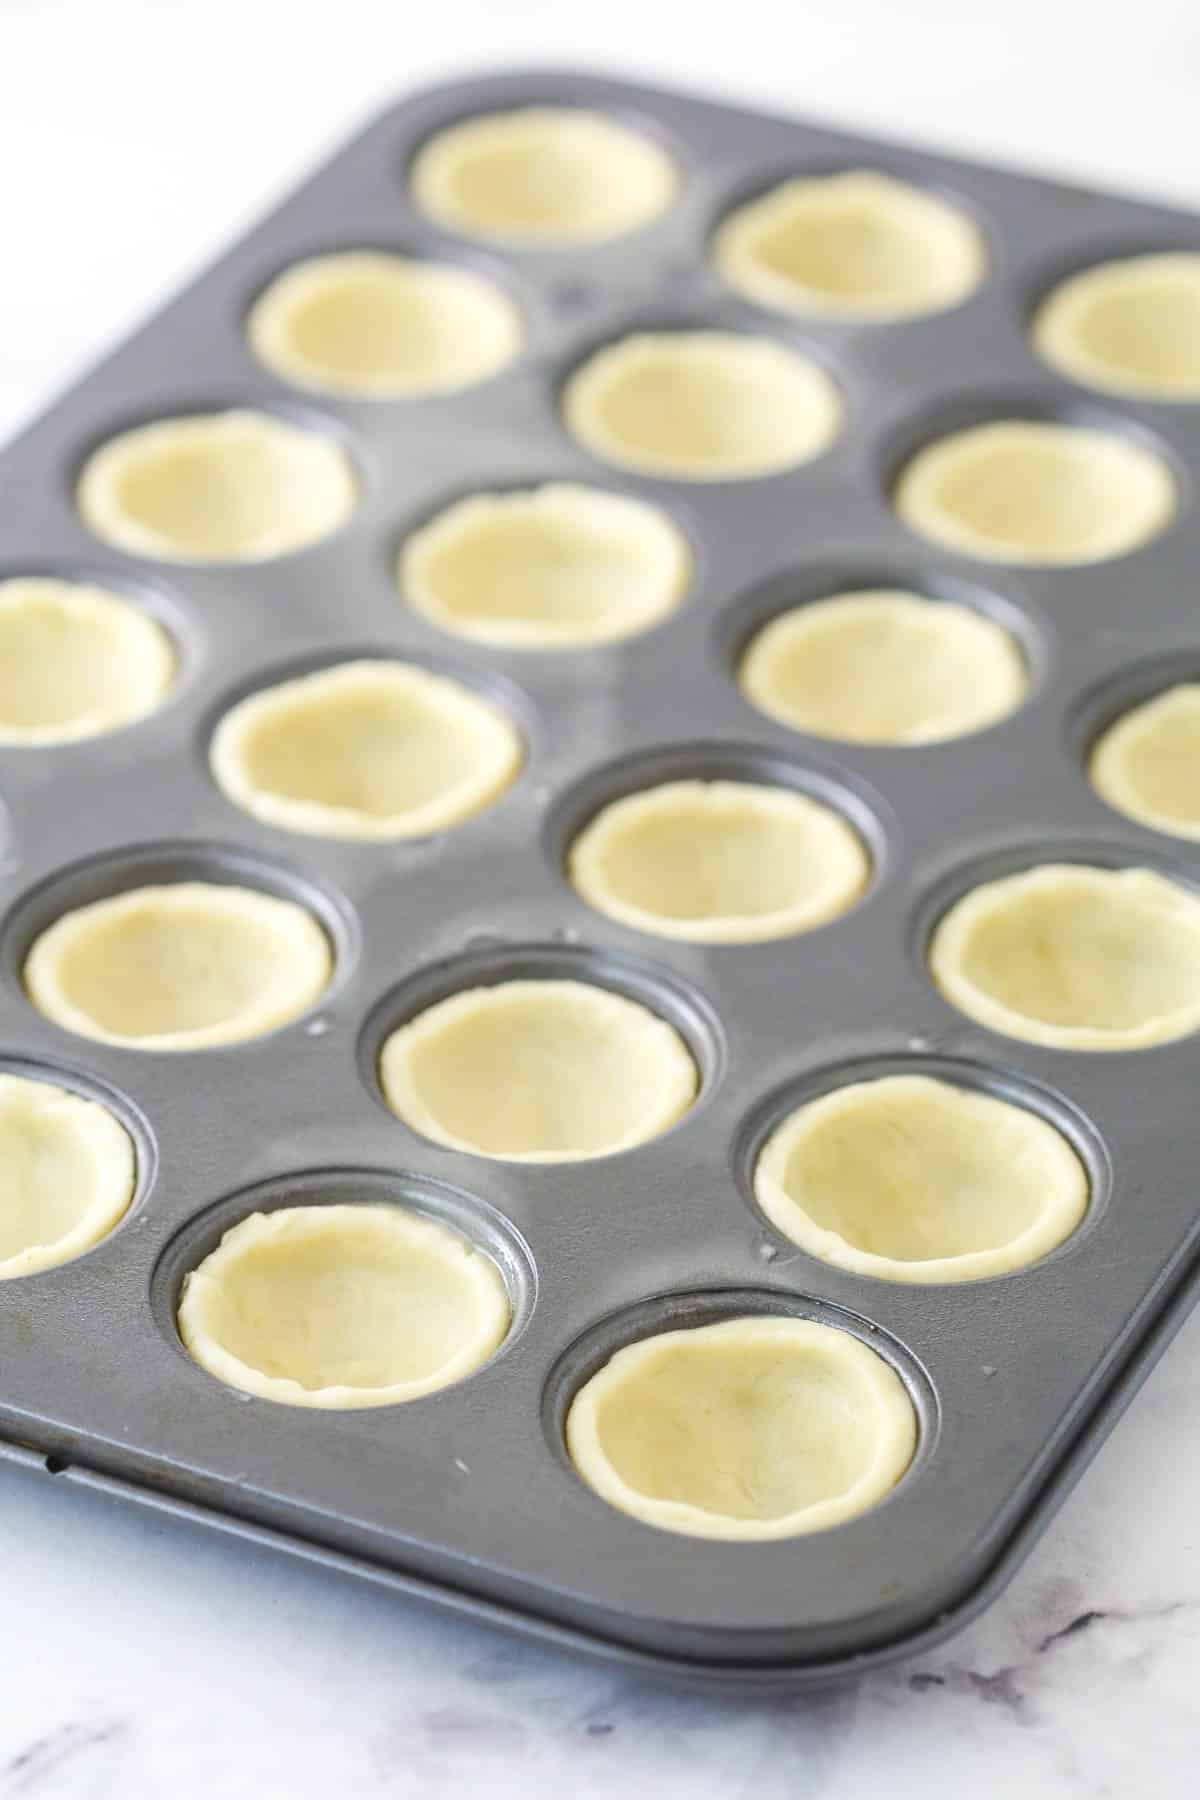 Fitting the crust into 24 mini muffin cups